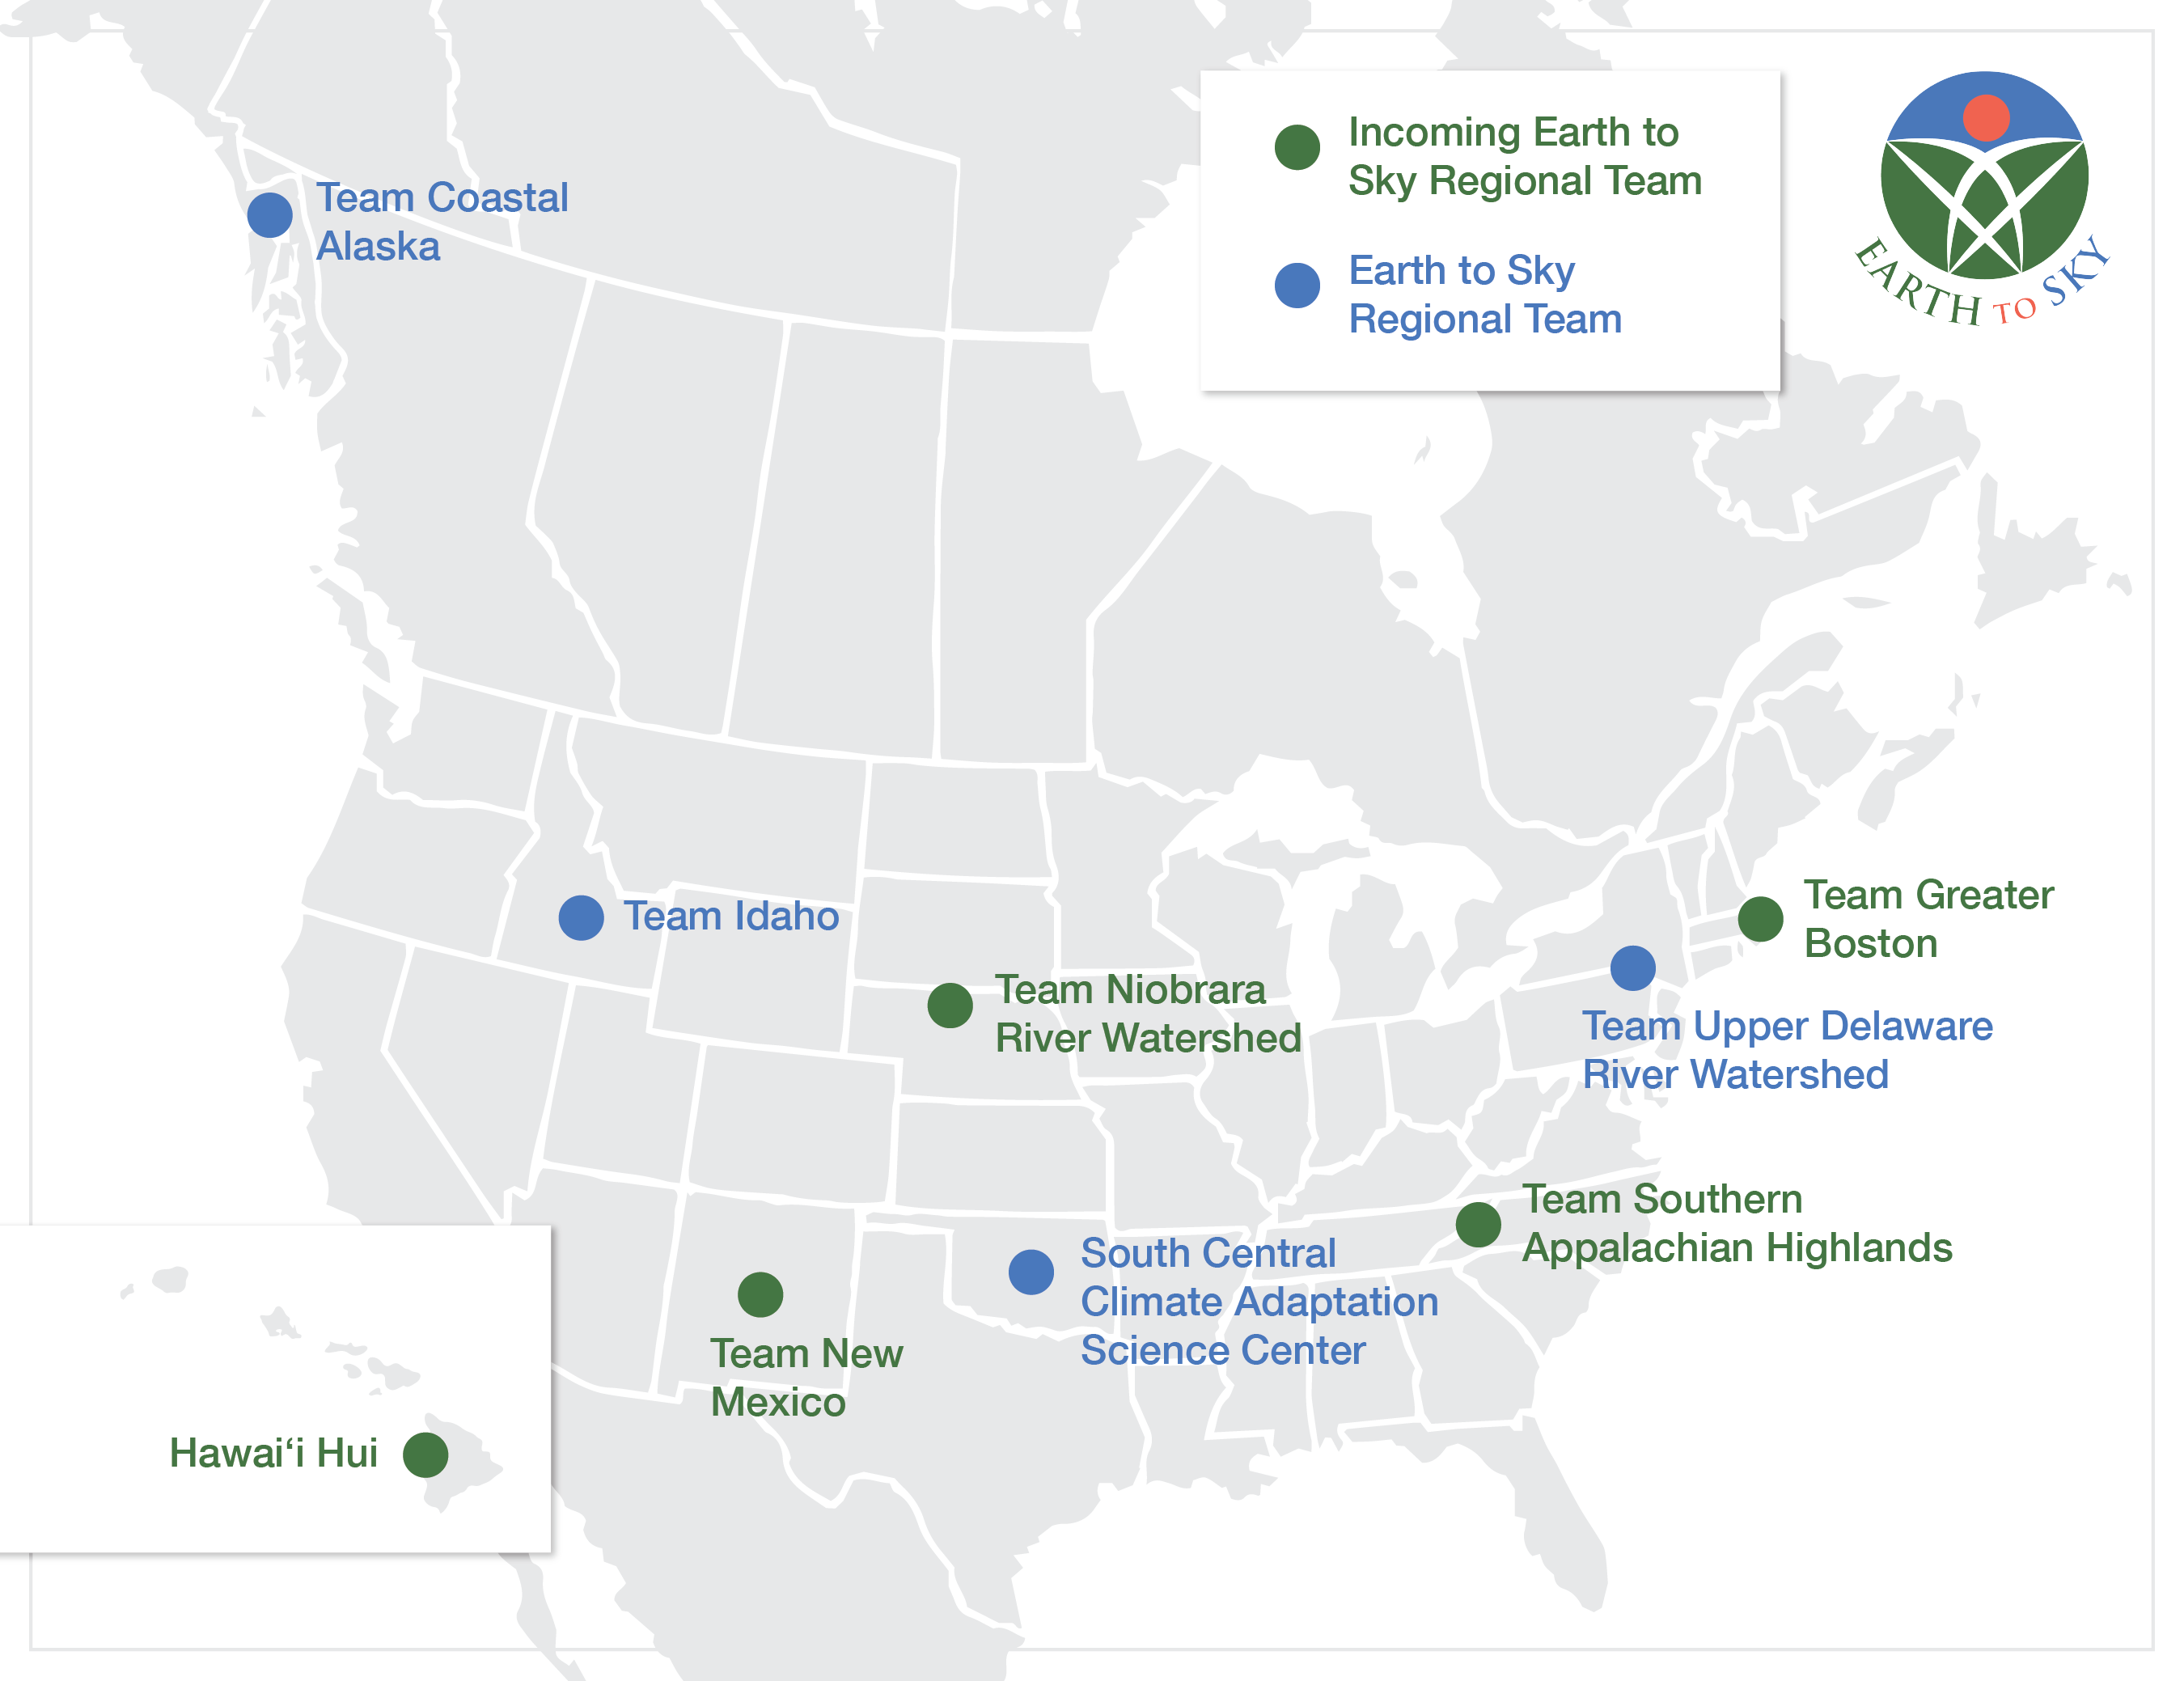 Map of North America showing dots with location of regional teams